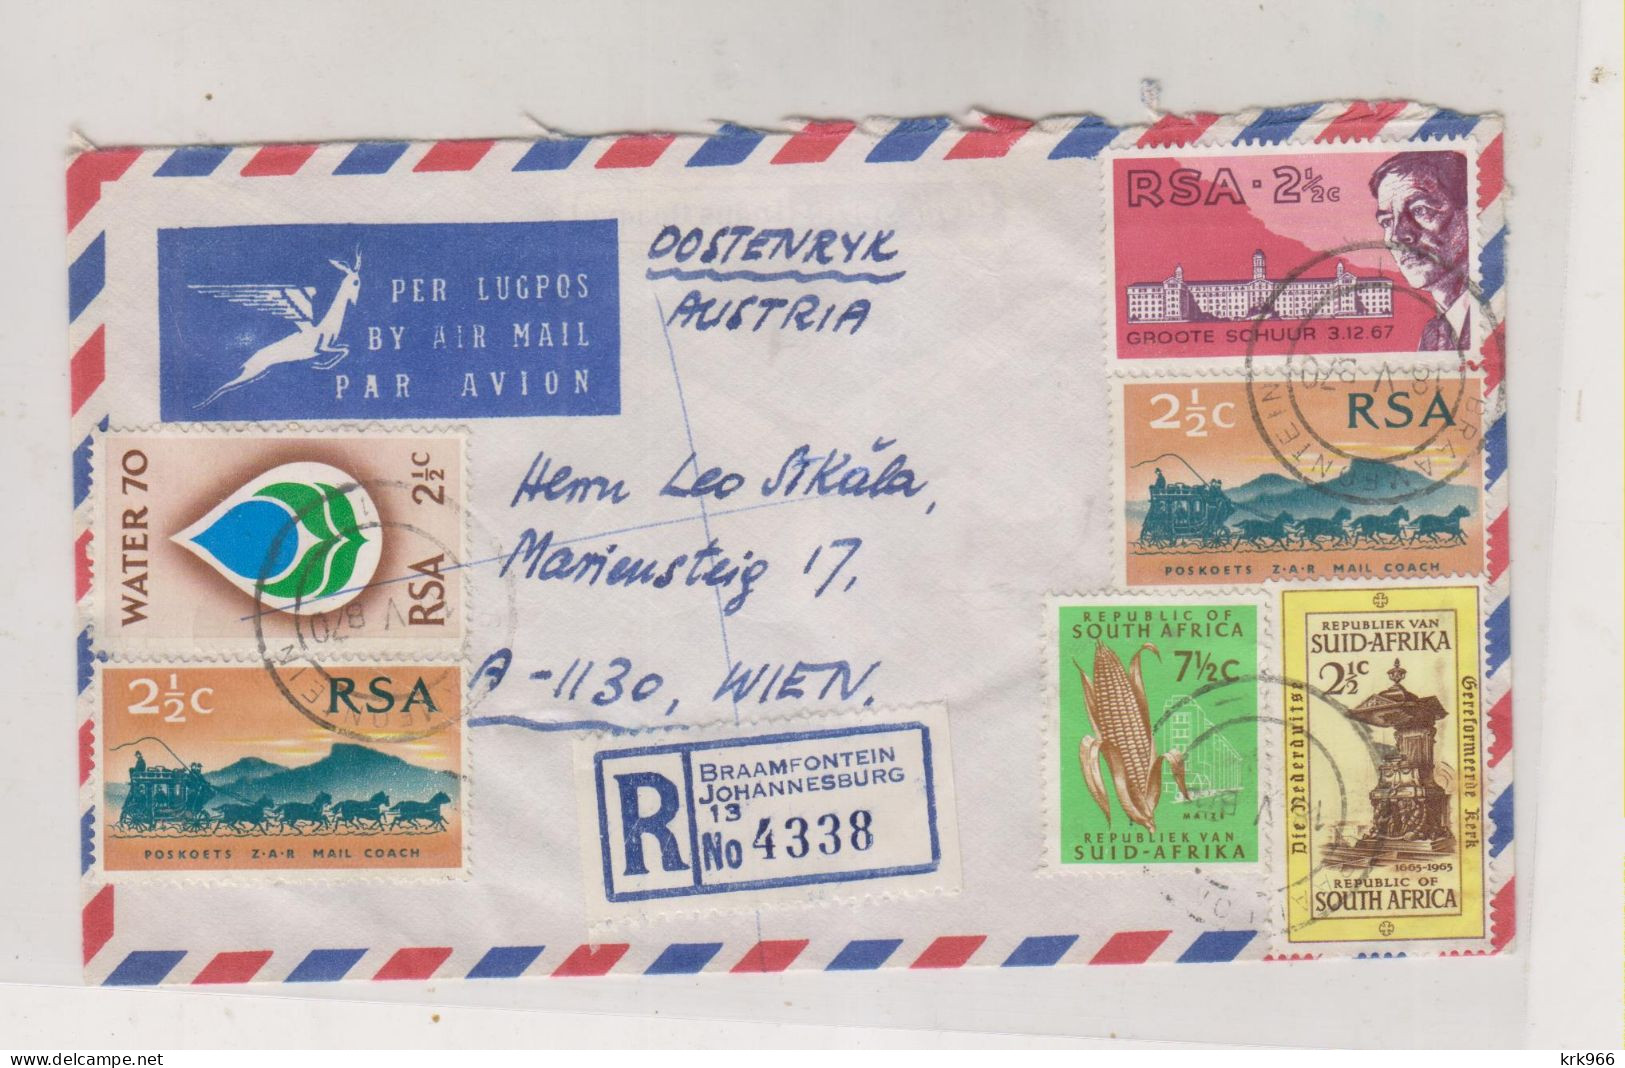 SOUTH AFRICA  BRAAMFONTEIN JOHANNESBURG  1970 Nice Registered Airmail Cover To Austria - Storia Postale